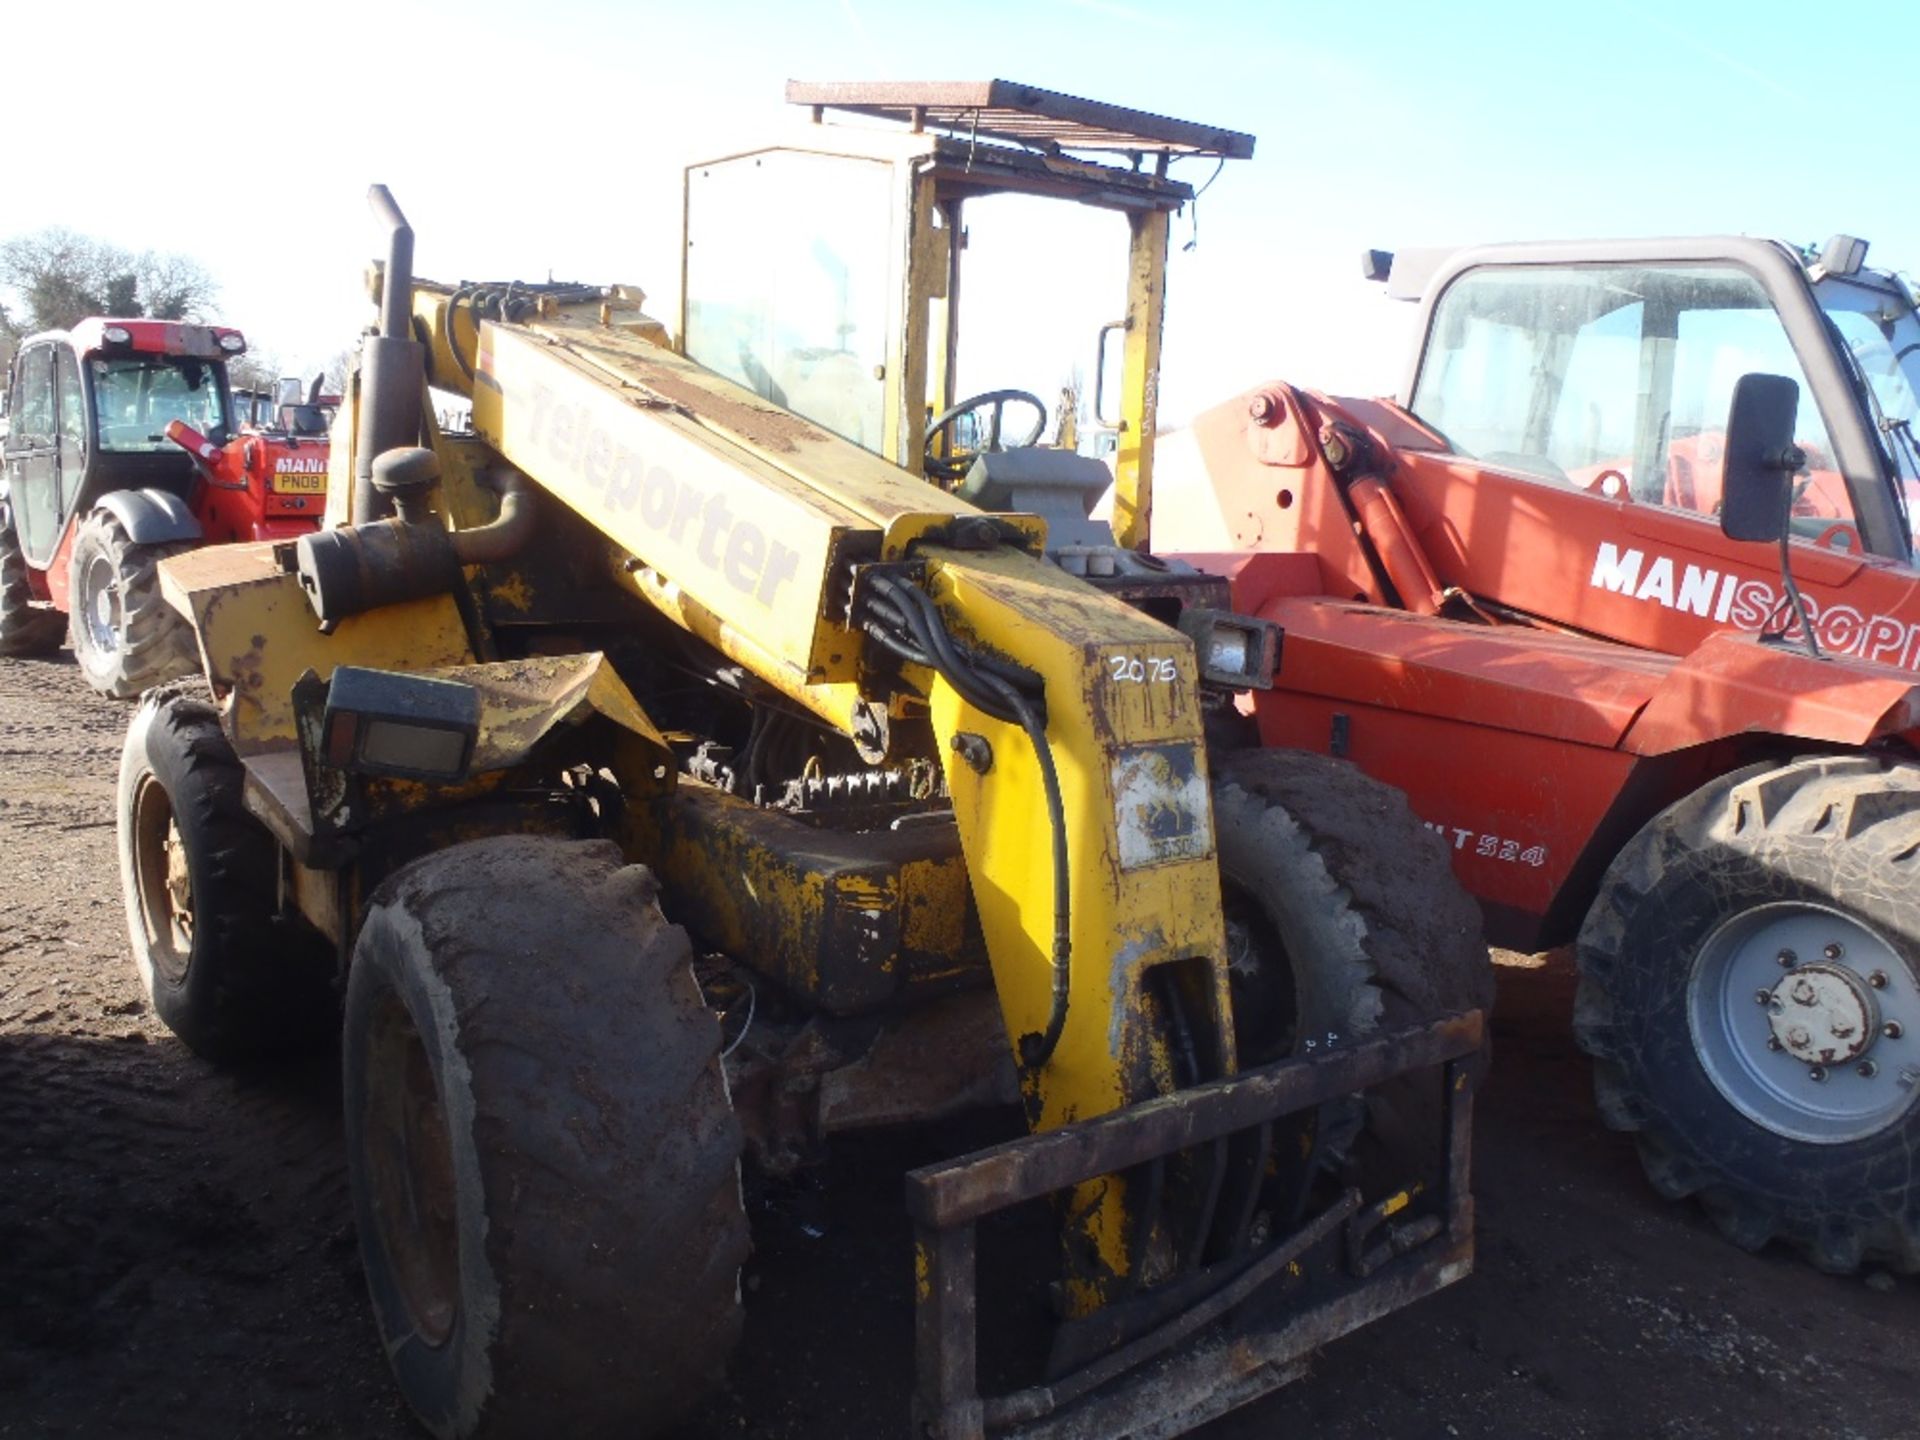 Sanderson 625 Turbo Telehandler with Perkins Engine. V5 will be supplied. Reg No. K776 ORL - Image 3 of 3